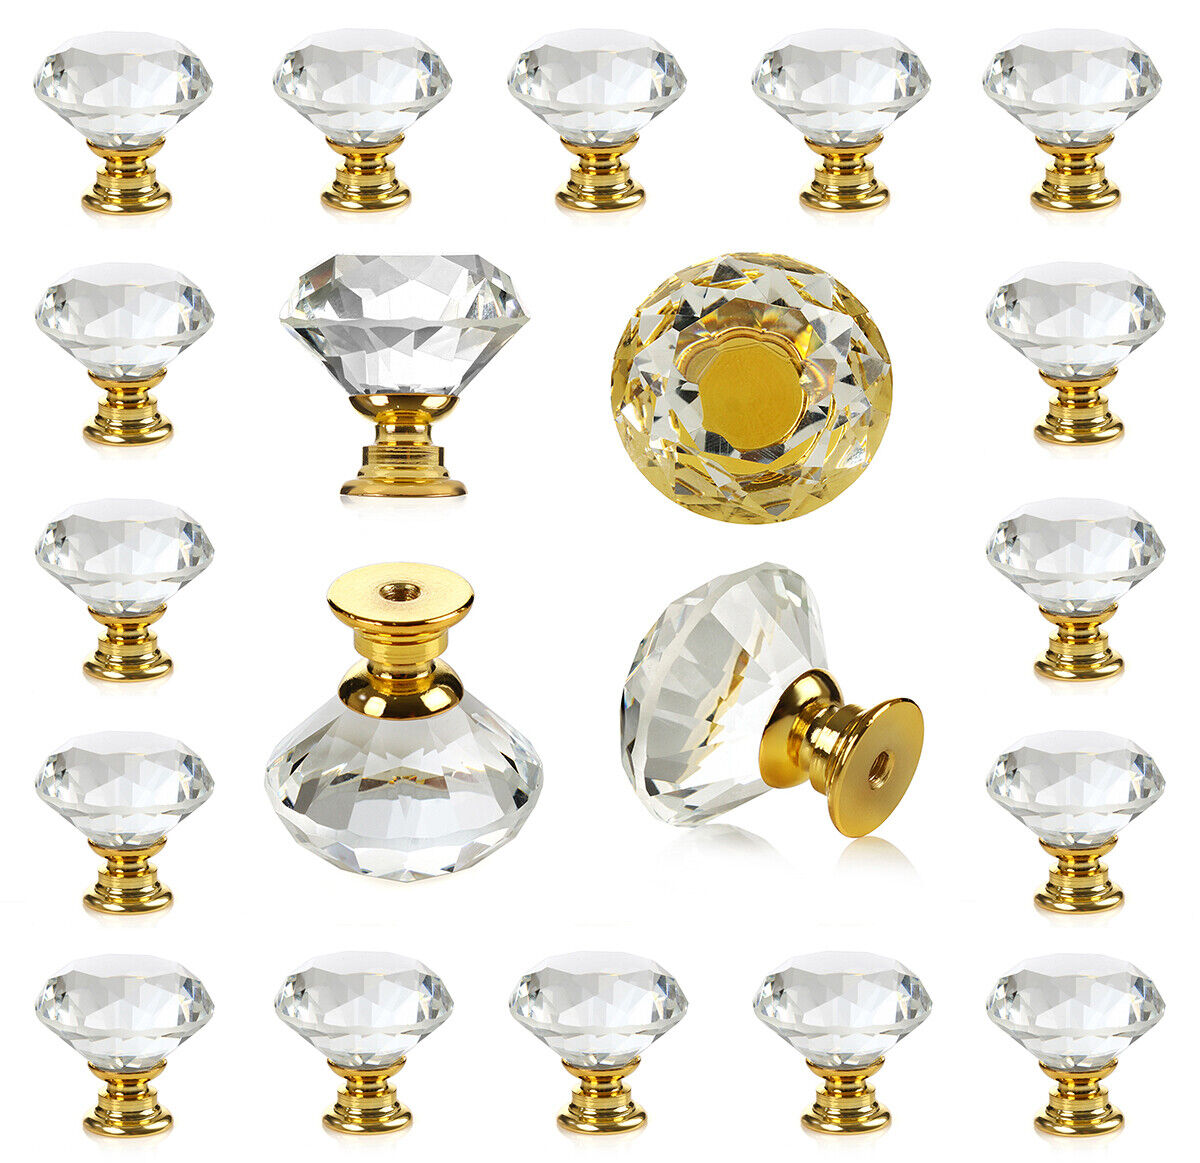 25 pc Crystal Gold Glass Knobs Drawer Pulls for Kitchen Cabinet Dresser Cupboard